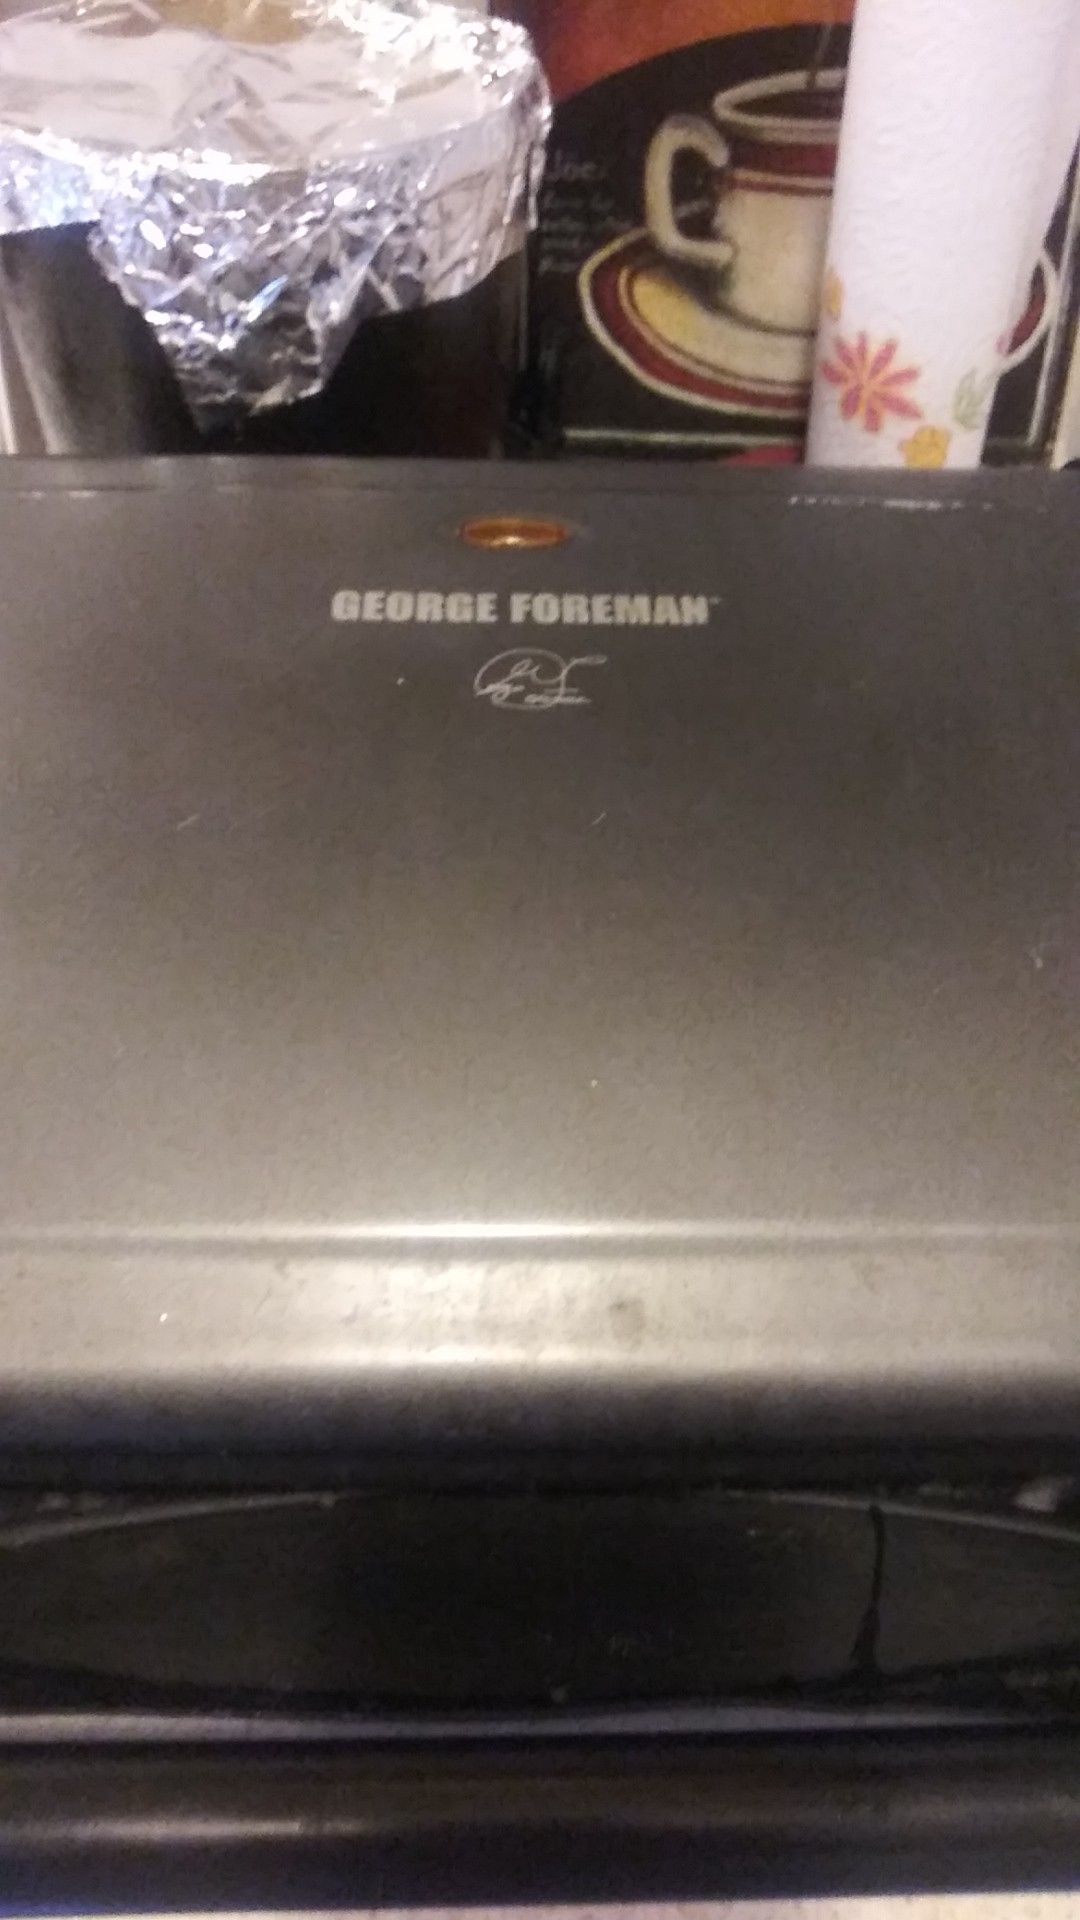 George Foreman grill $10.00